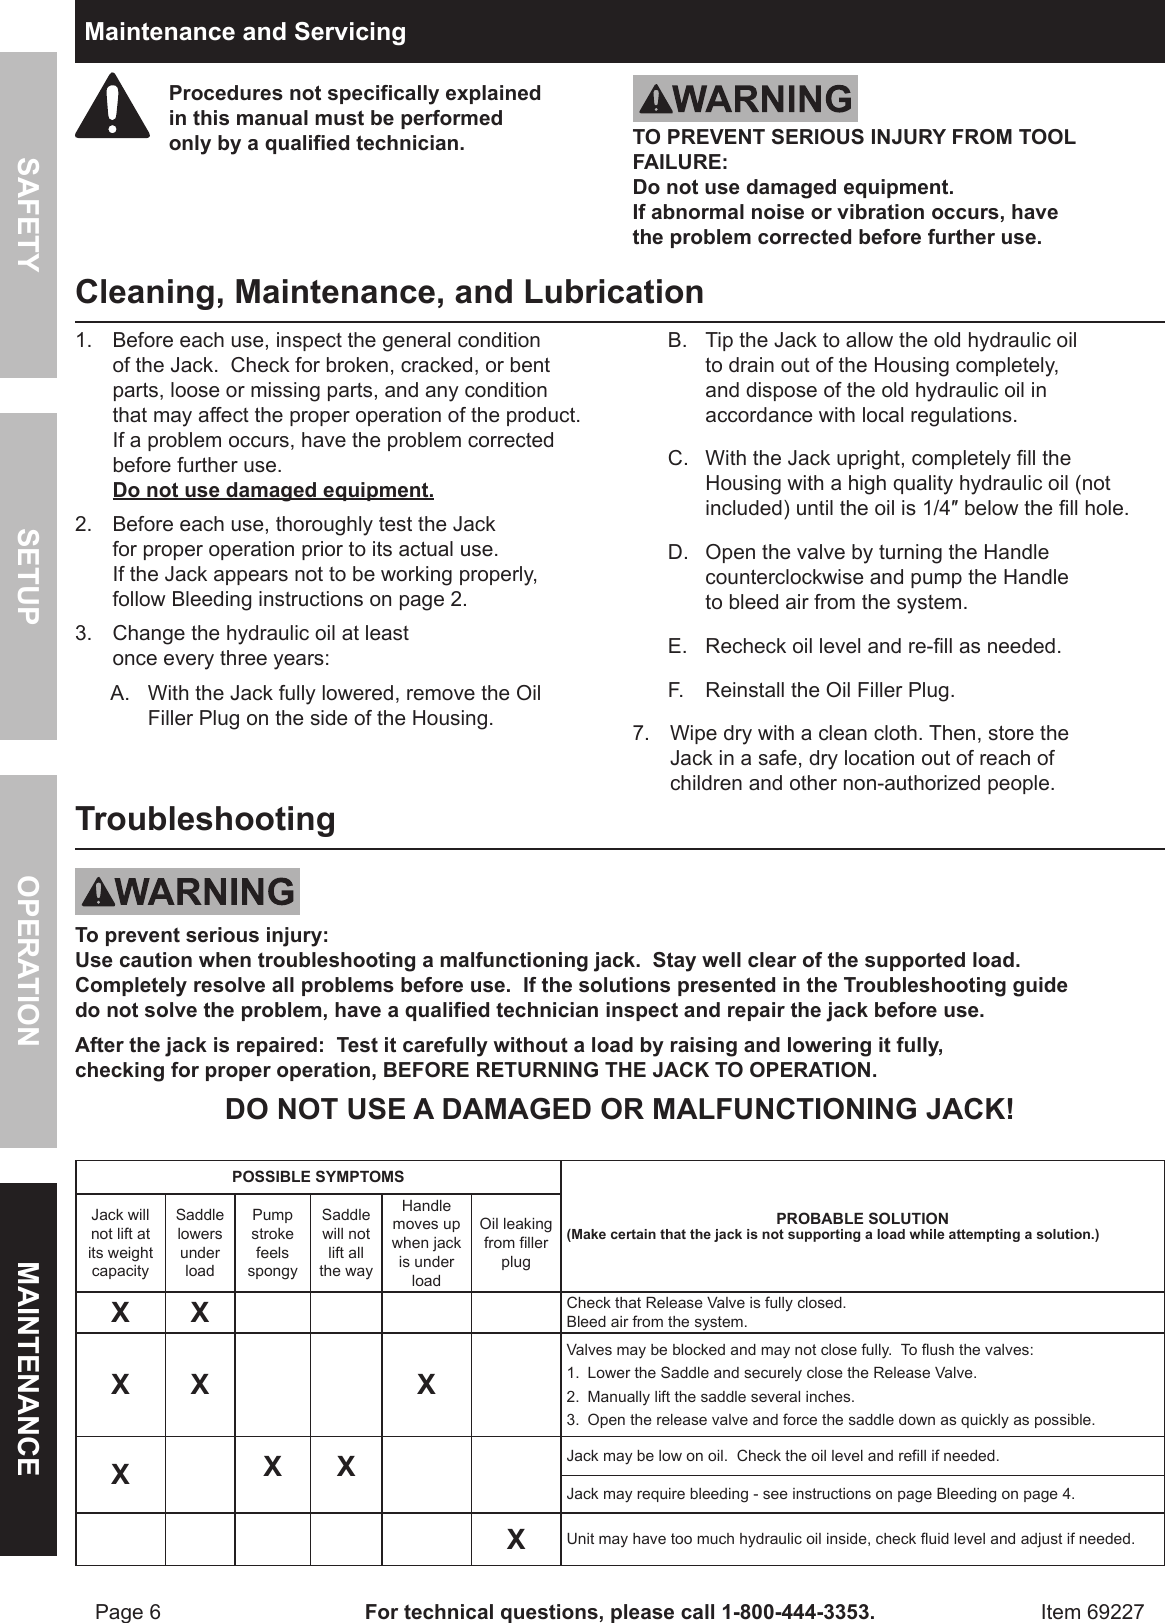 Page 6 of 8 - Harbor-Freight Harbor-Freight-69227-Owner-S-Manual